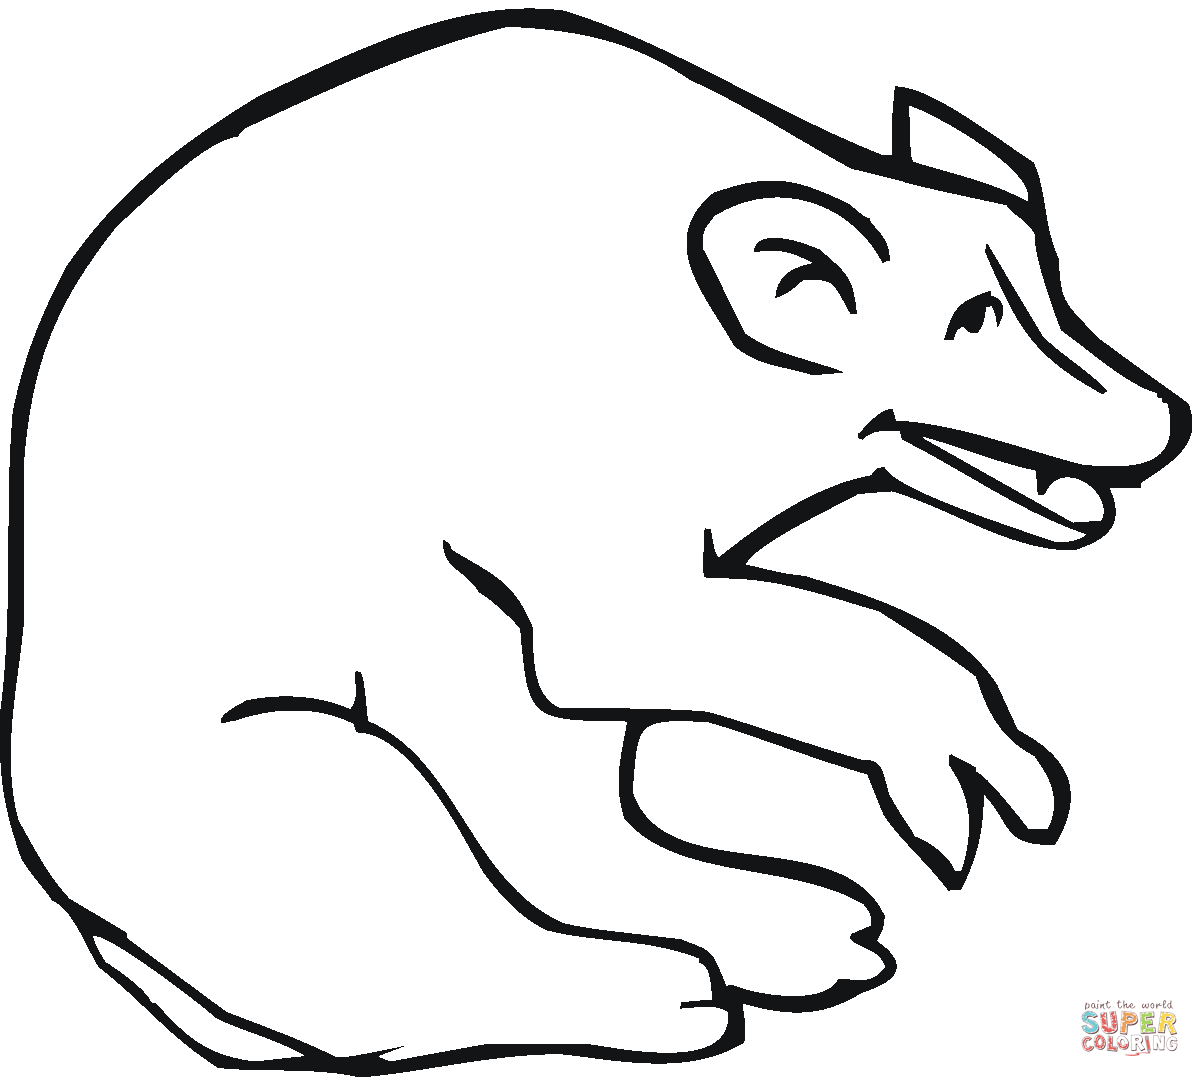 Laughing Hyena coloring page | Free Printable Coloring Pages